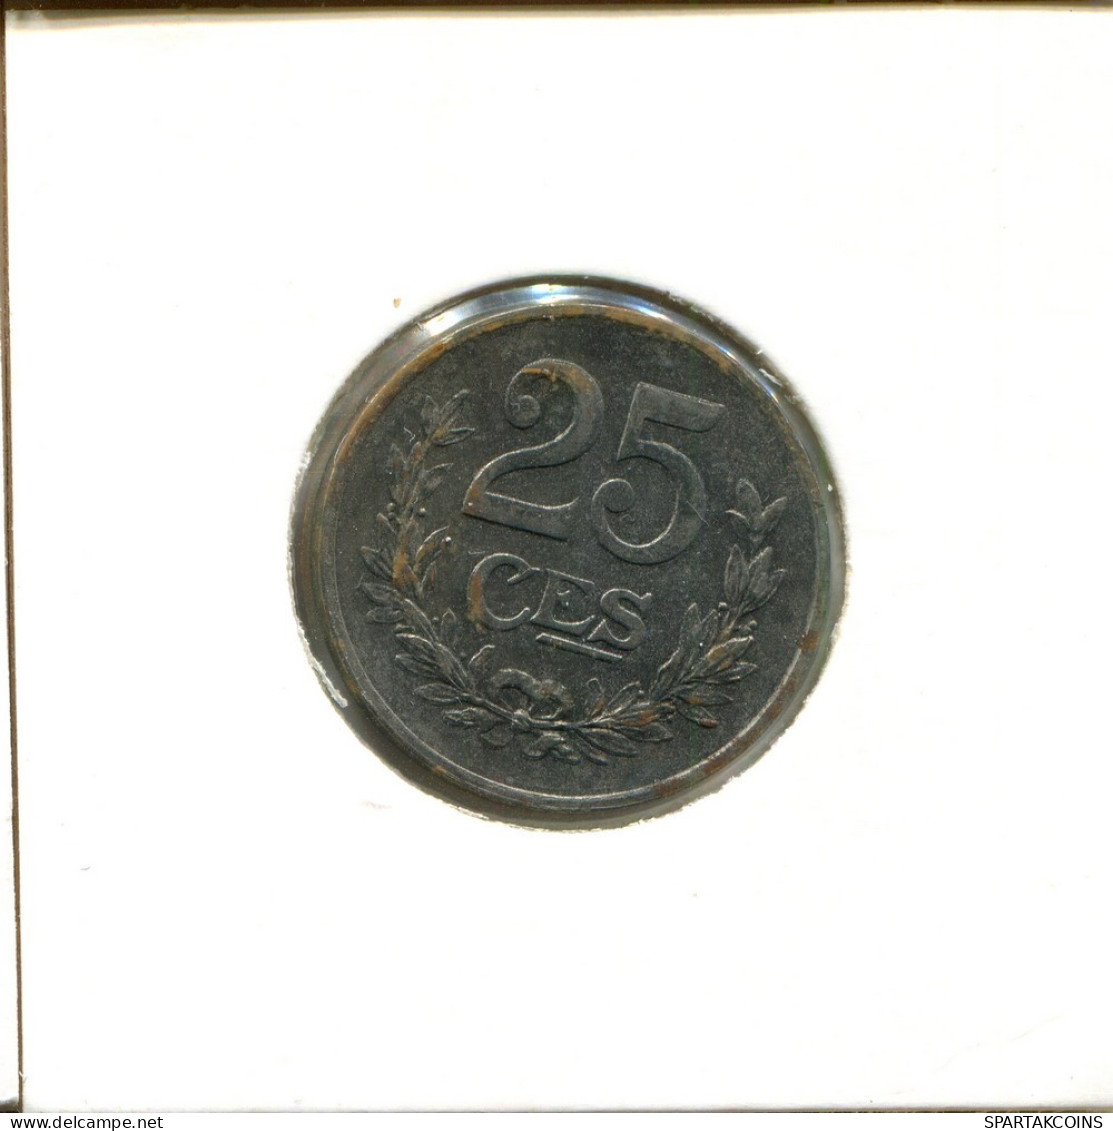 25 CENTIMES 1920 LUXEMBOURG Coin #AT186.U.A - Luxembourg